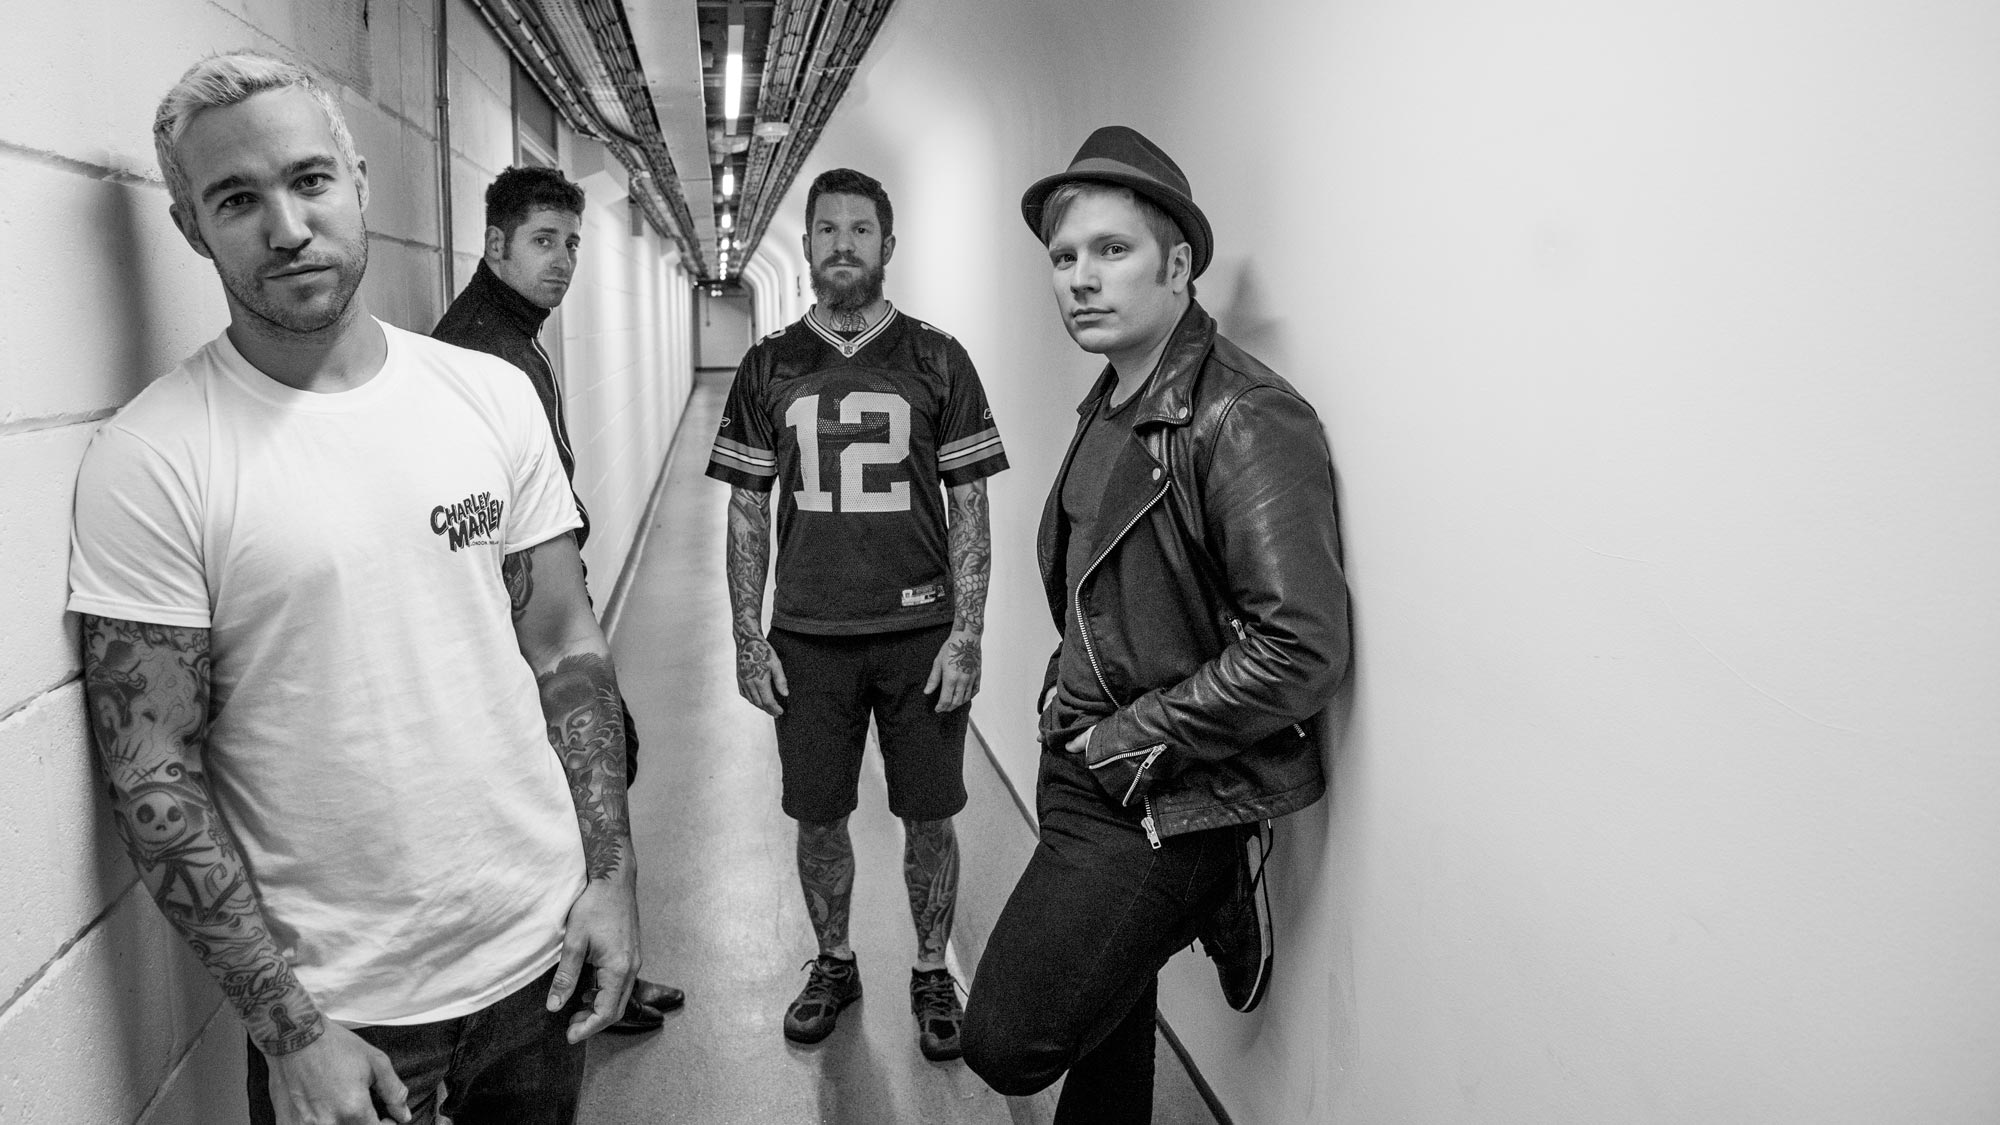 Fall Out Boy Release New Song, Video and Tour Dates - GENRE IS DEAD!